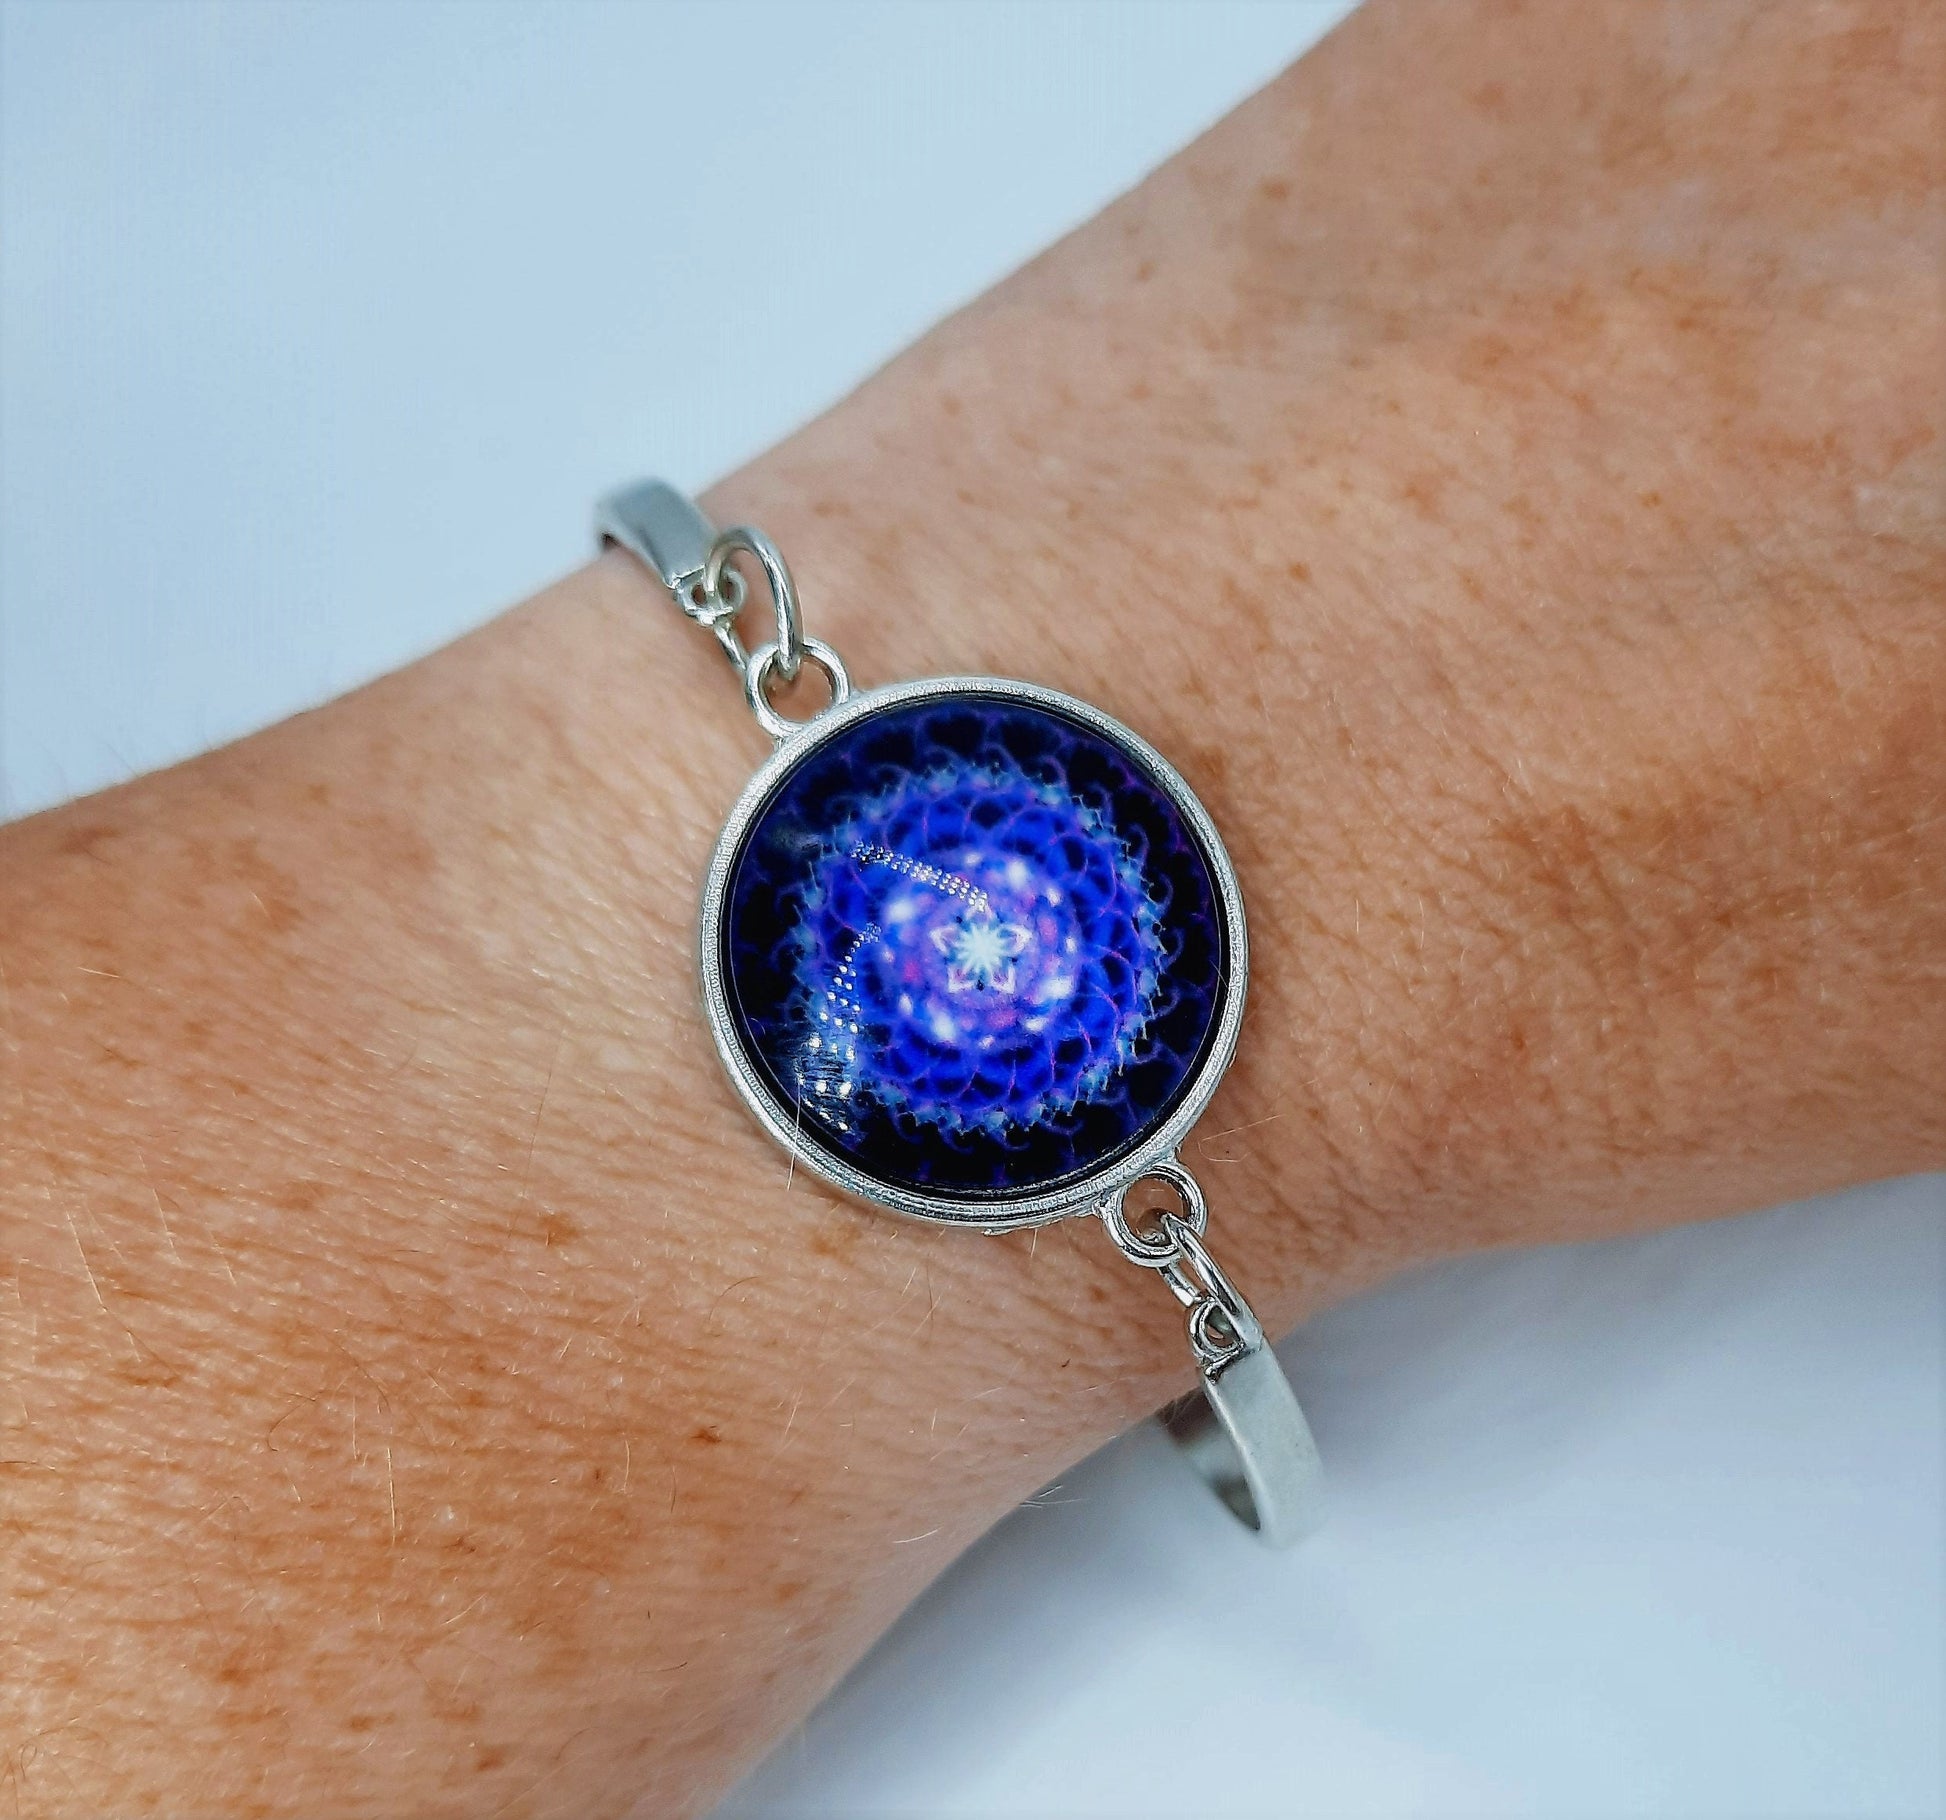 Purple Mandala Pattern Design - Glass Cabochon Stainless Steel Adjustable Bangle Bracelet - Made with Hypoallergenic Stainless Steel